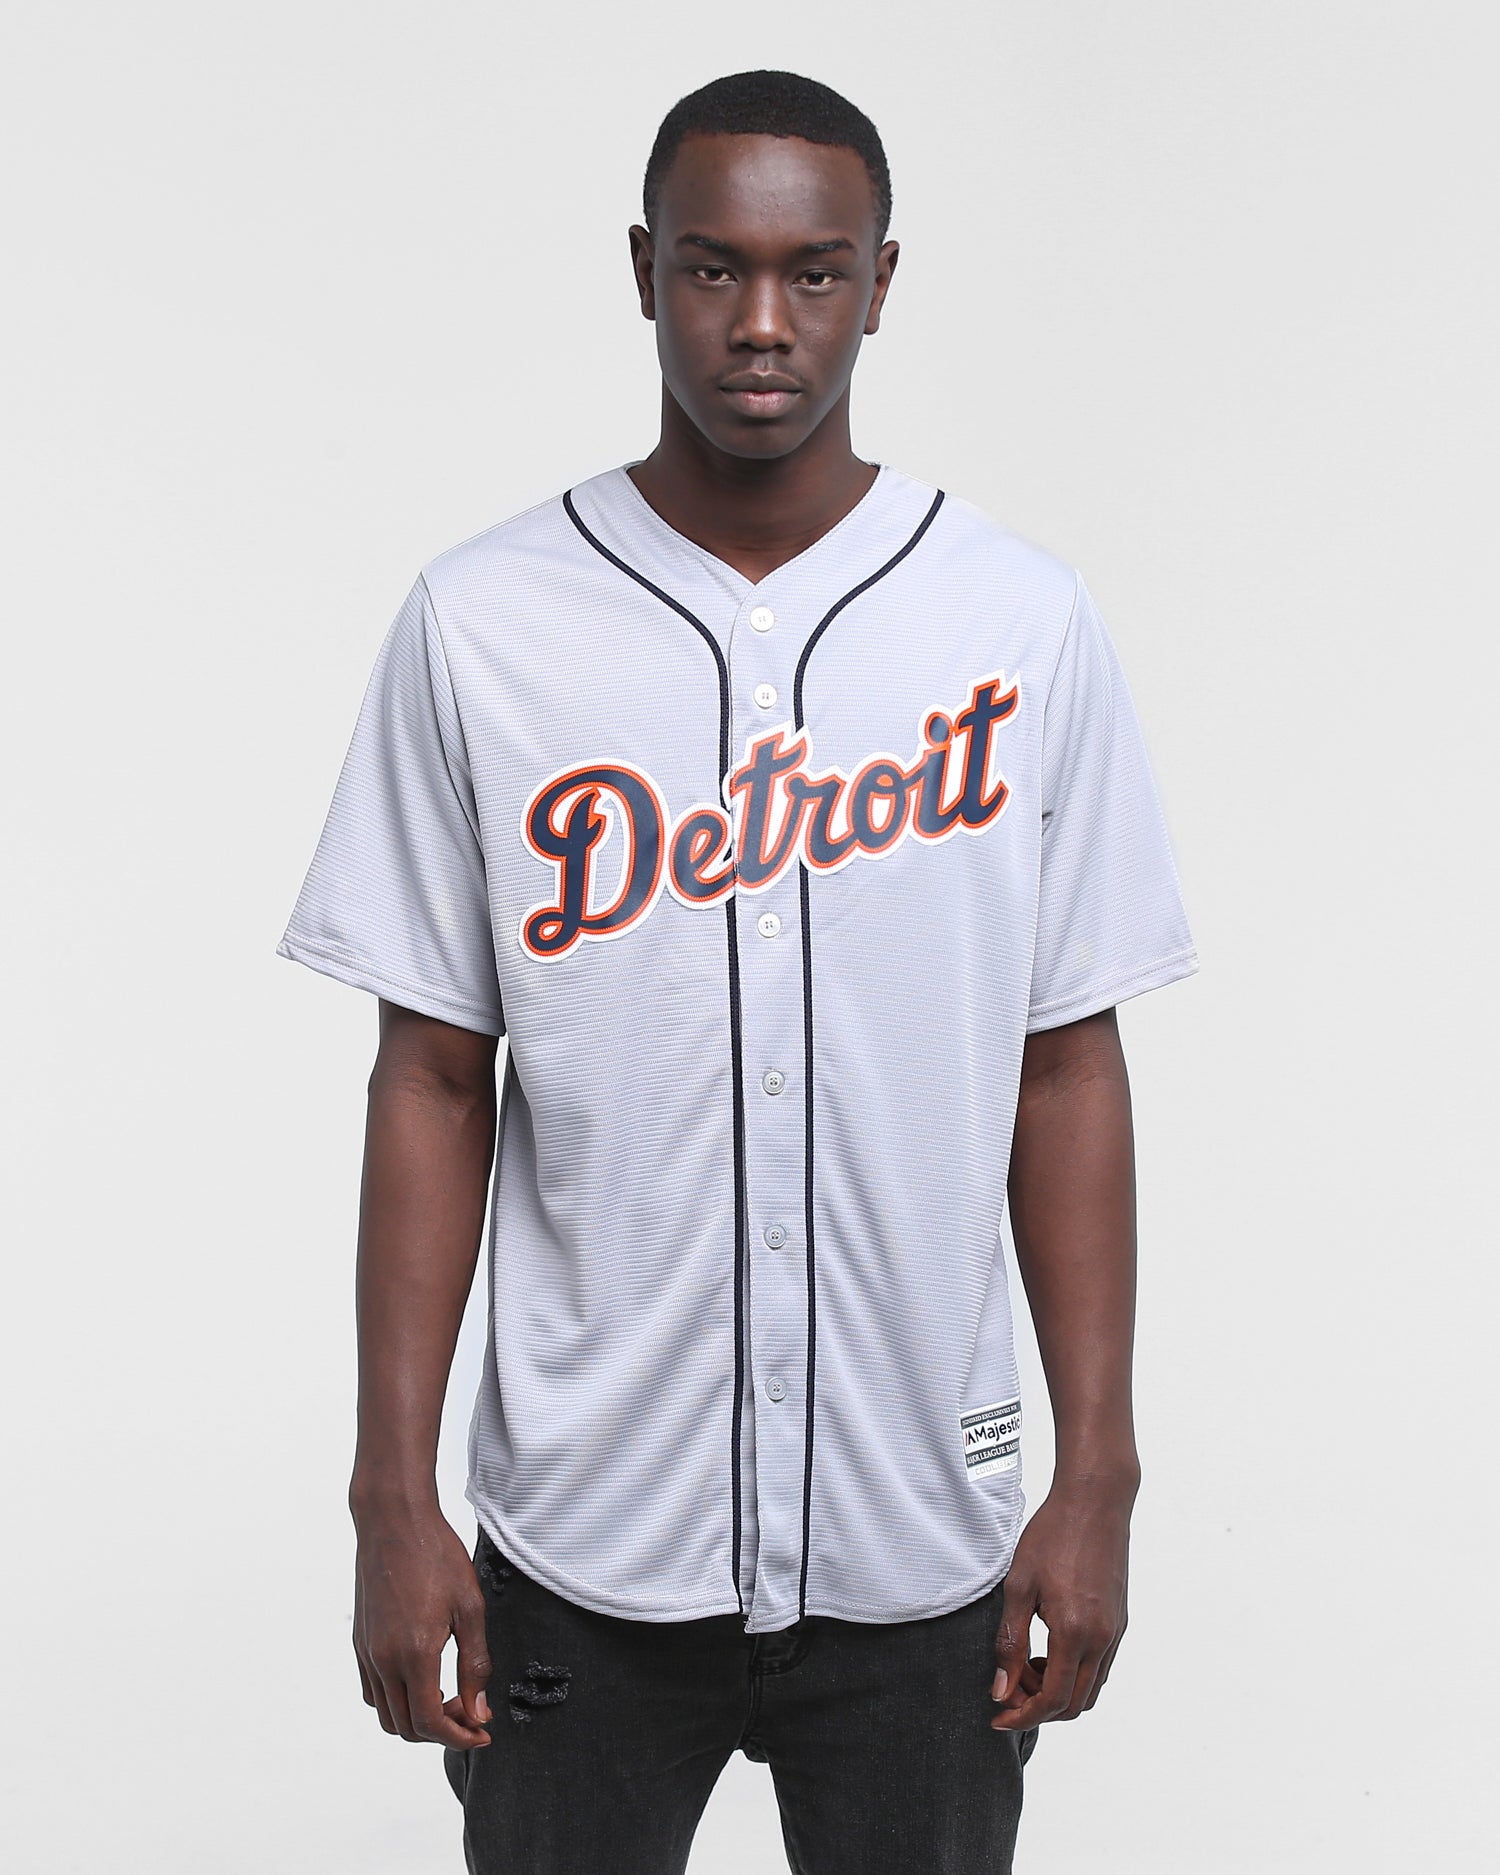 baseball jersey and jeans